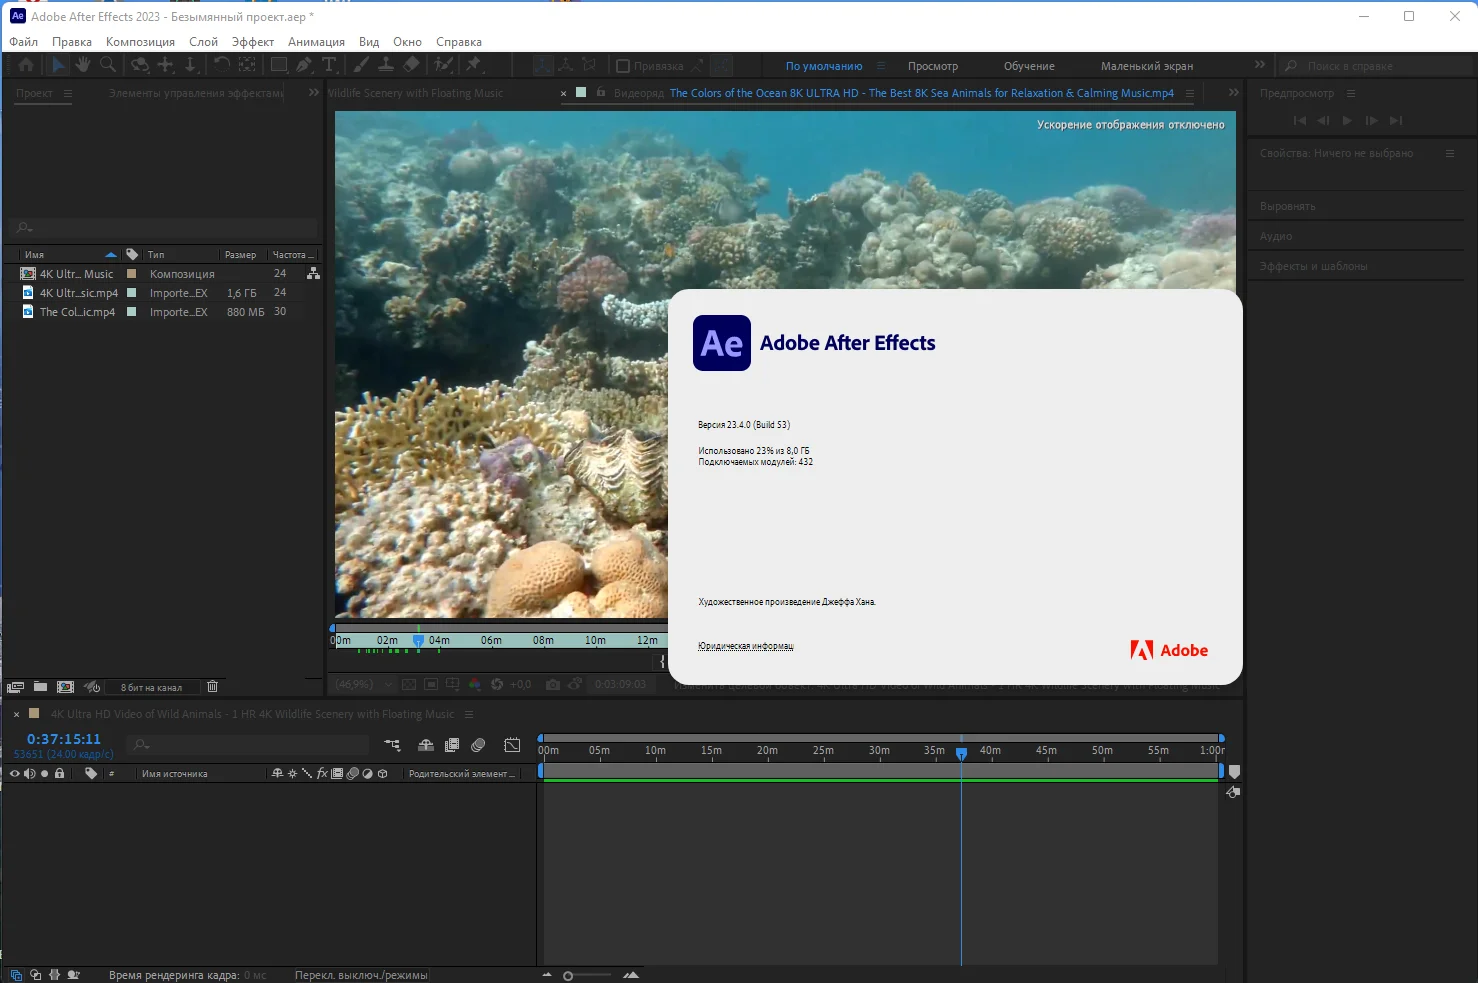 Adobe application. Adobe after Effects 2023. Adobe after Effects 2023 23.2.1.3. Трекинг в after Effects 2023. Горячие клавиши Adobe after Effects 2023.